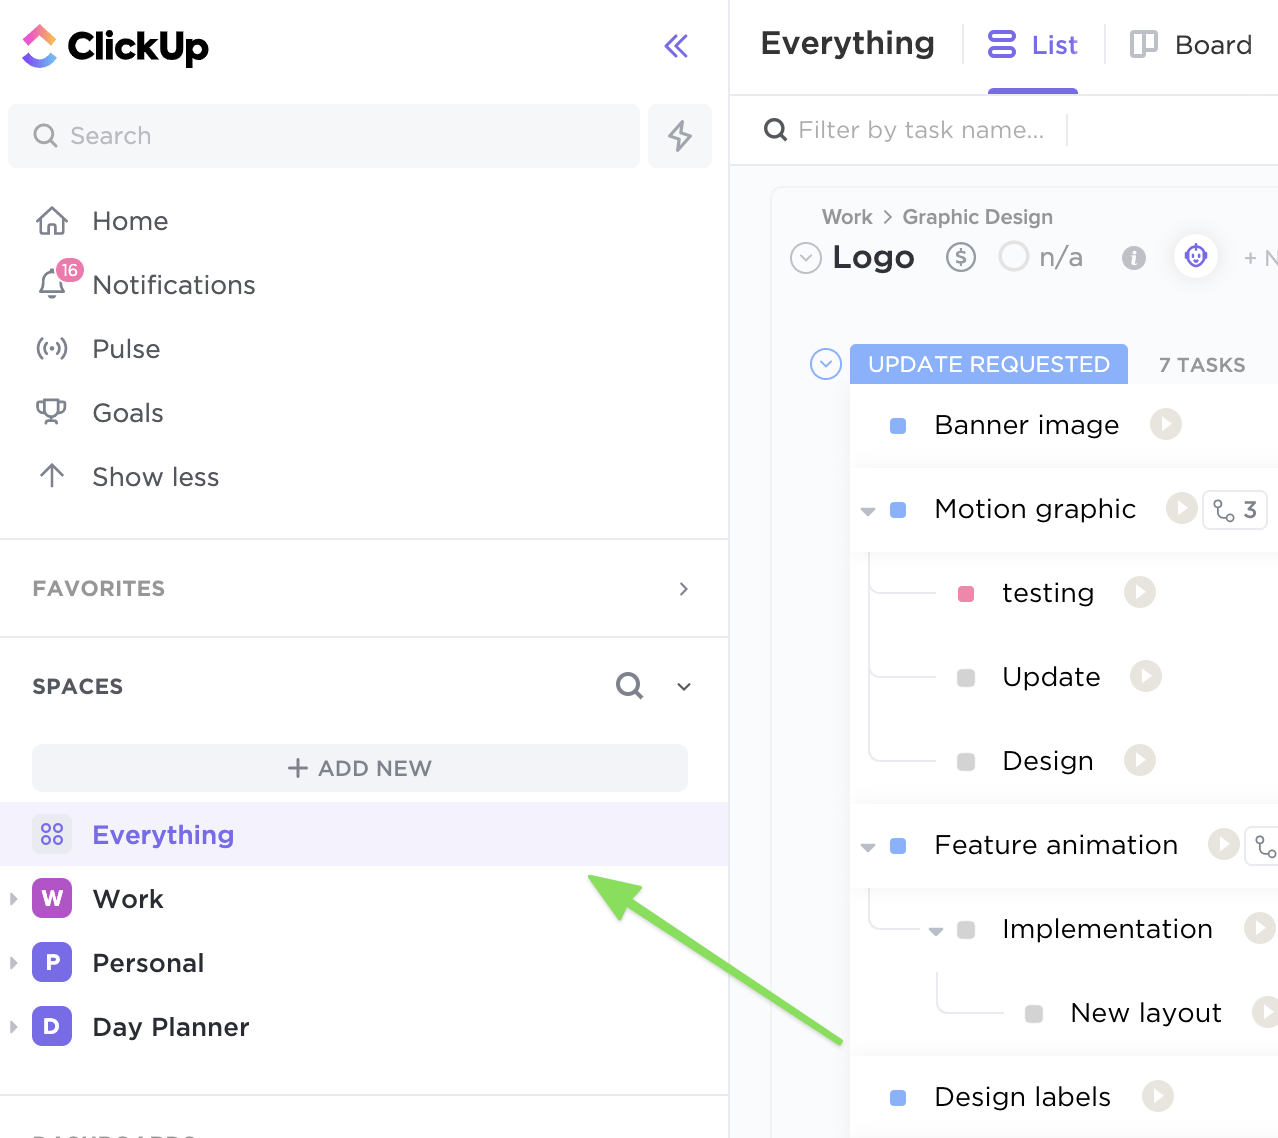 List view in ClickUp